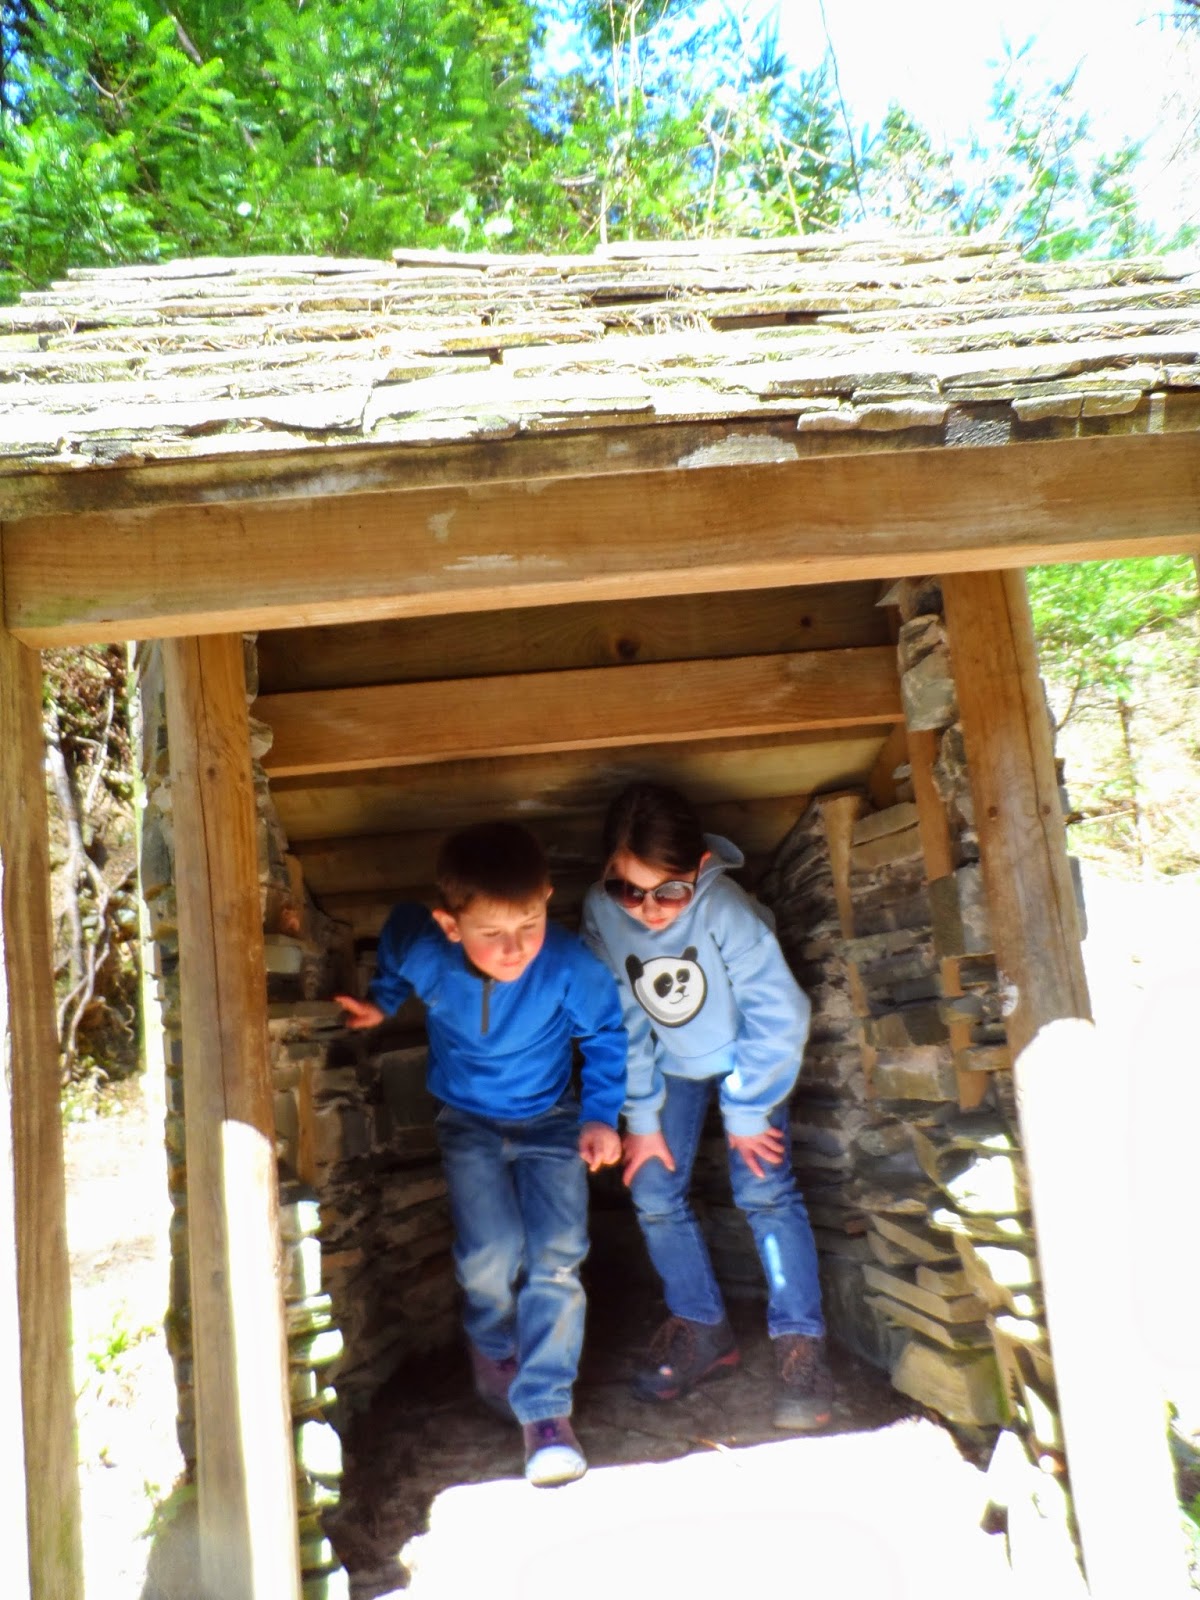 Grizedale Forest Gruffalo trail, nope not in here.